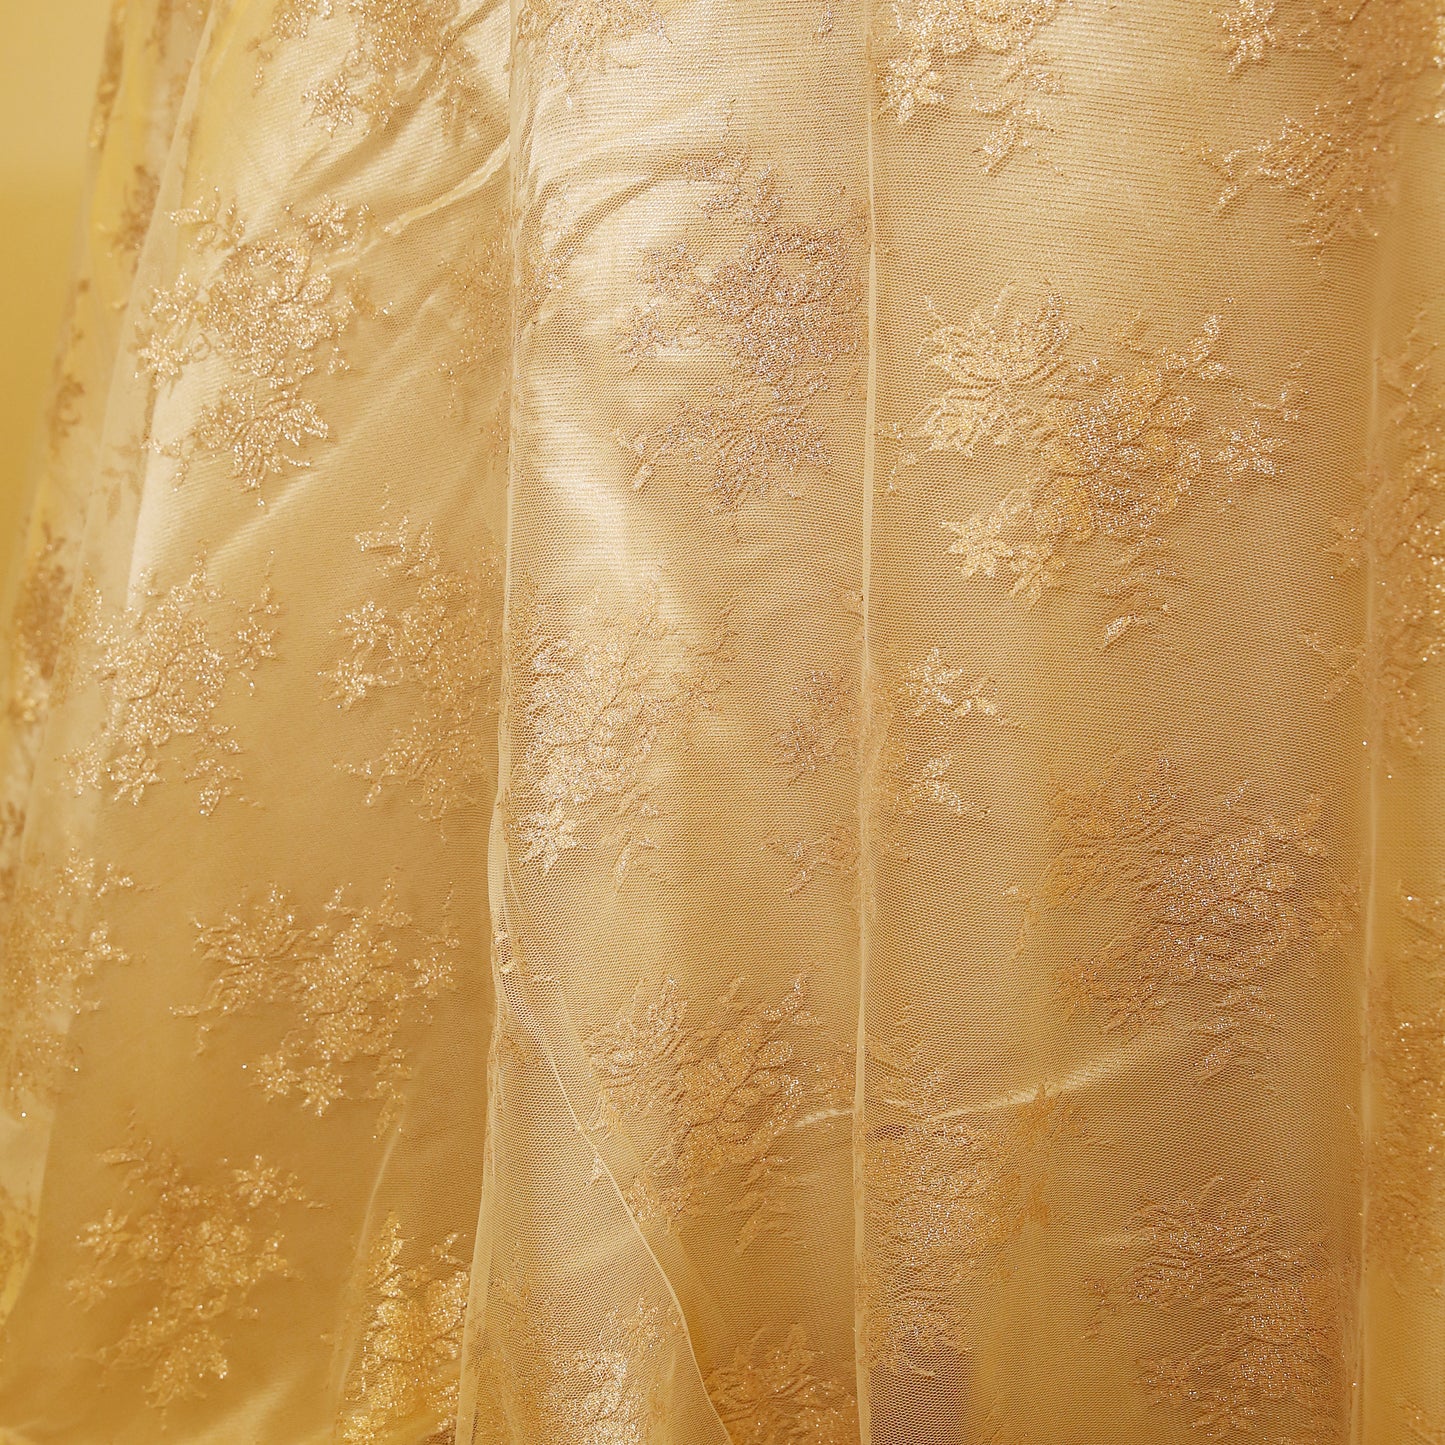 French Vintage lace - Gold